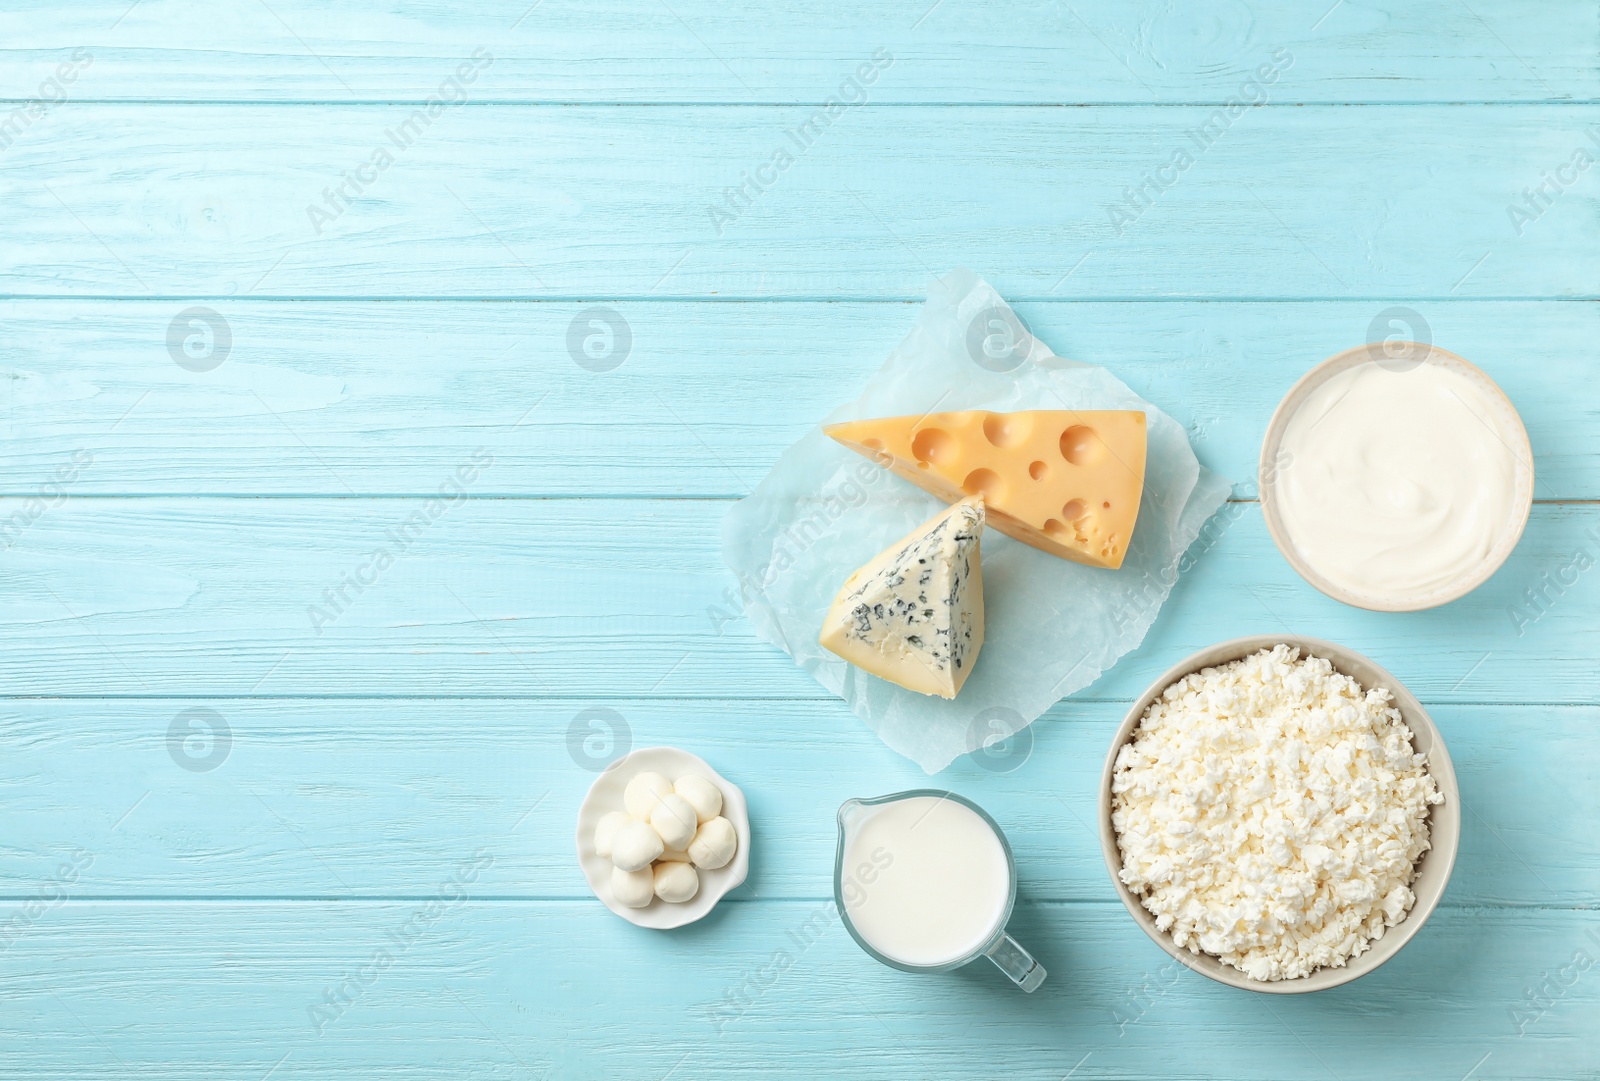 Photo of Flat lay composition with different dairy products on wooden background